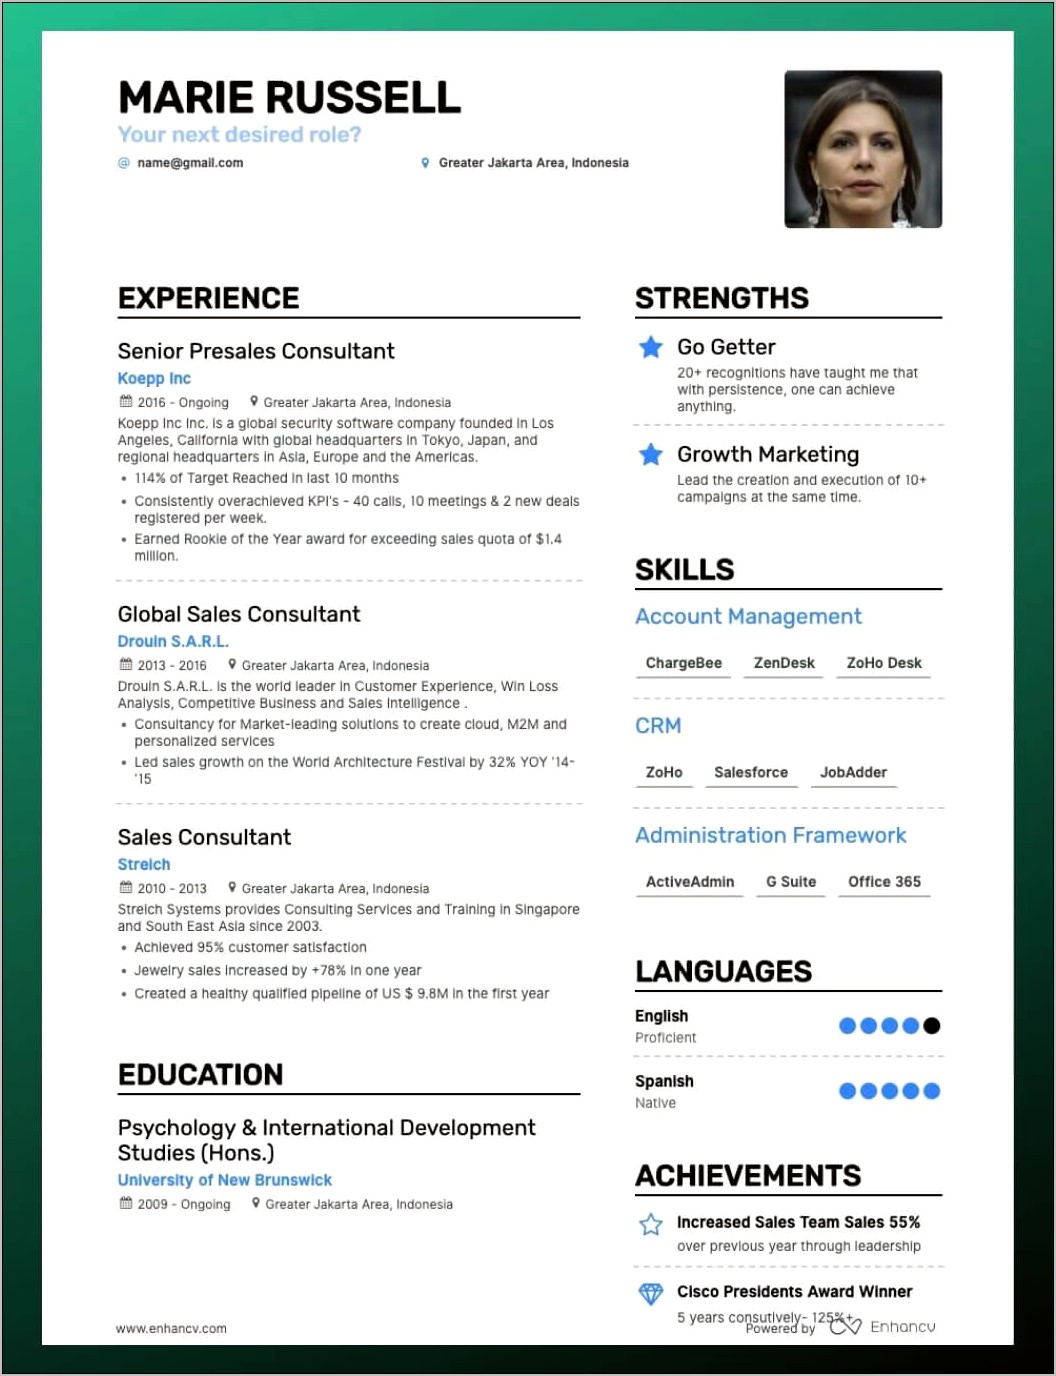 Proficiency With A Skill On A Resume